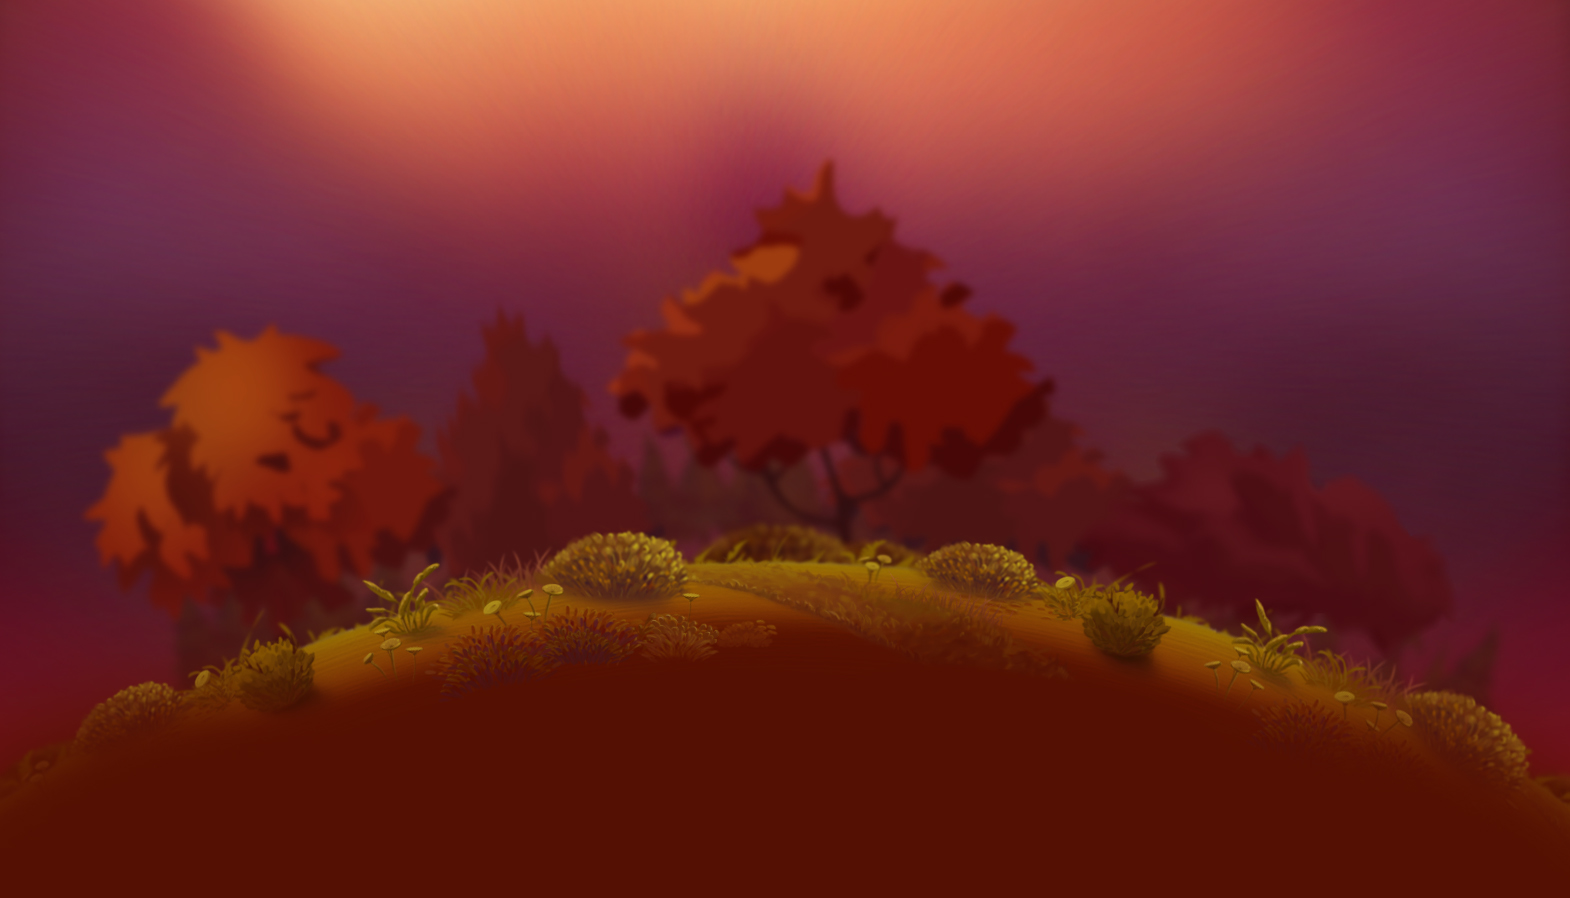 05_background_without_grass_redridinghood.jpg thumbnail